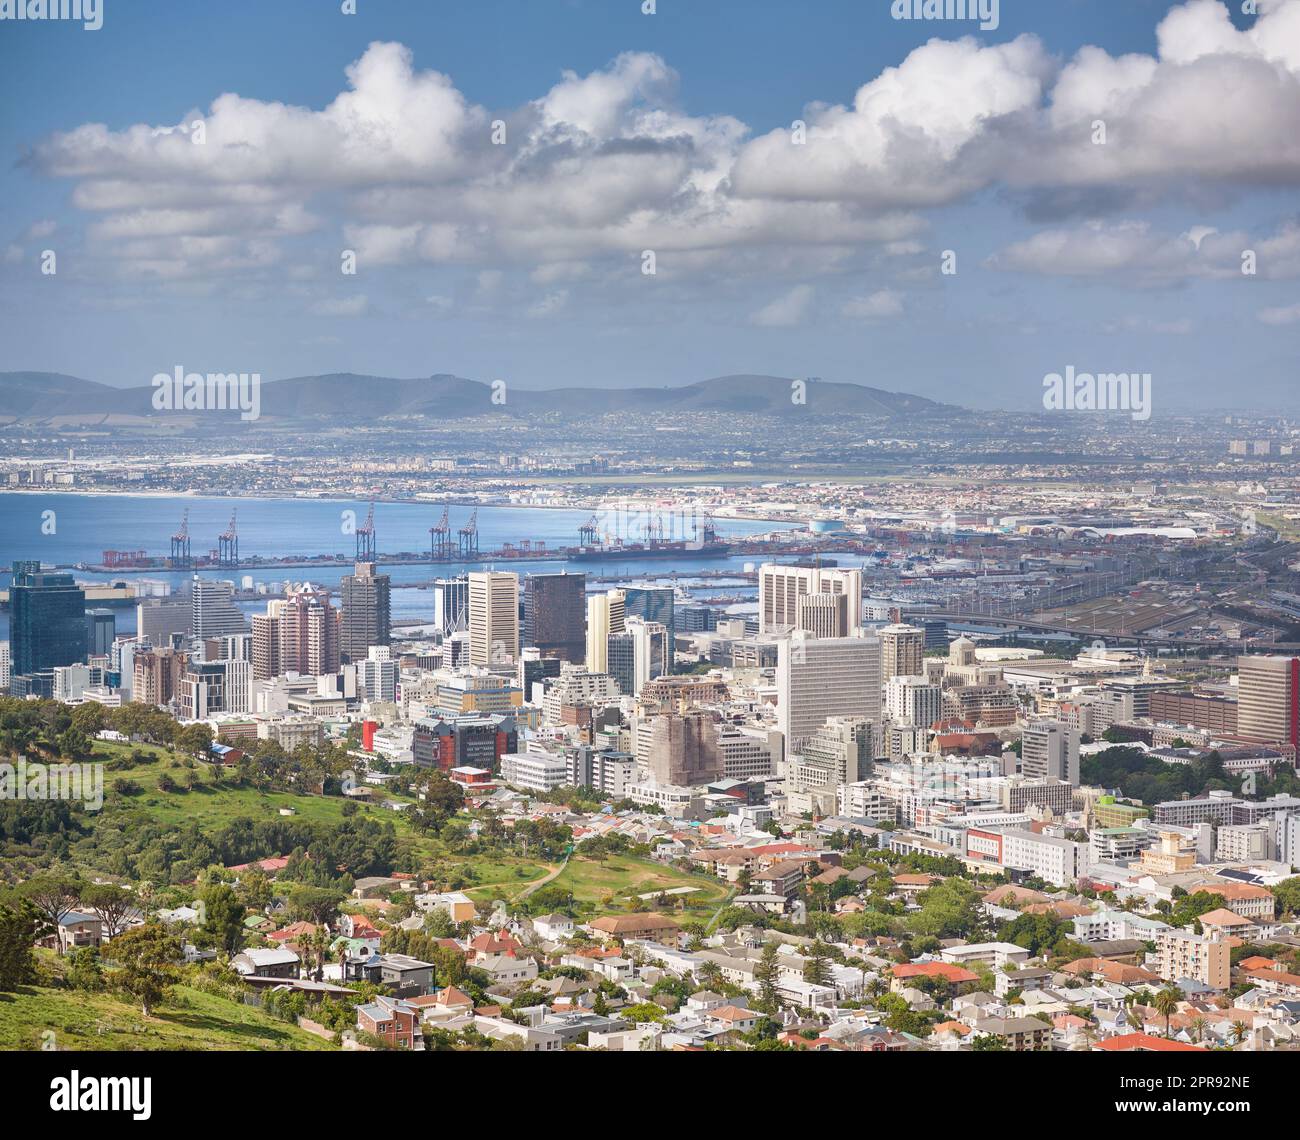 Landscape of buildings in an urban town with greenery along the mountain and sea. Copy space with views from Signal Hill in Cape Town, South Africa of a cloudy blue sky over a beautiful coastal city Stock Photo